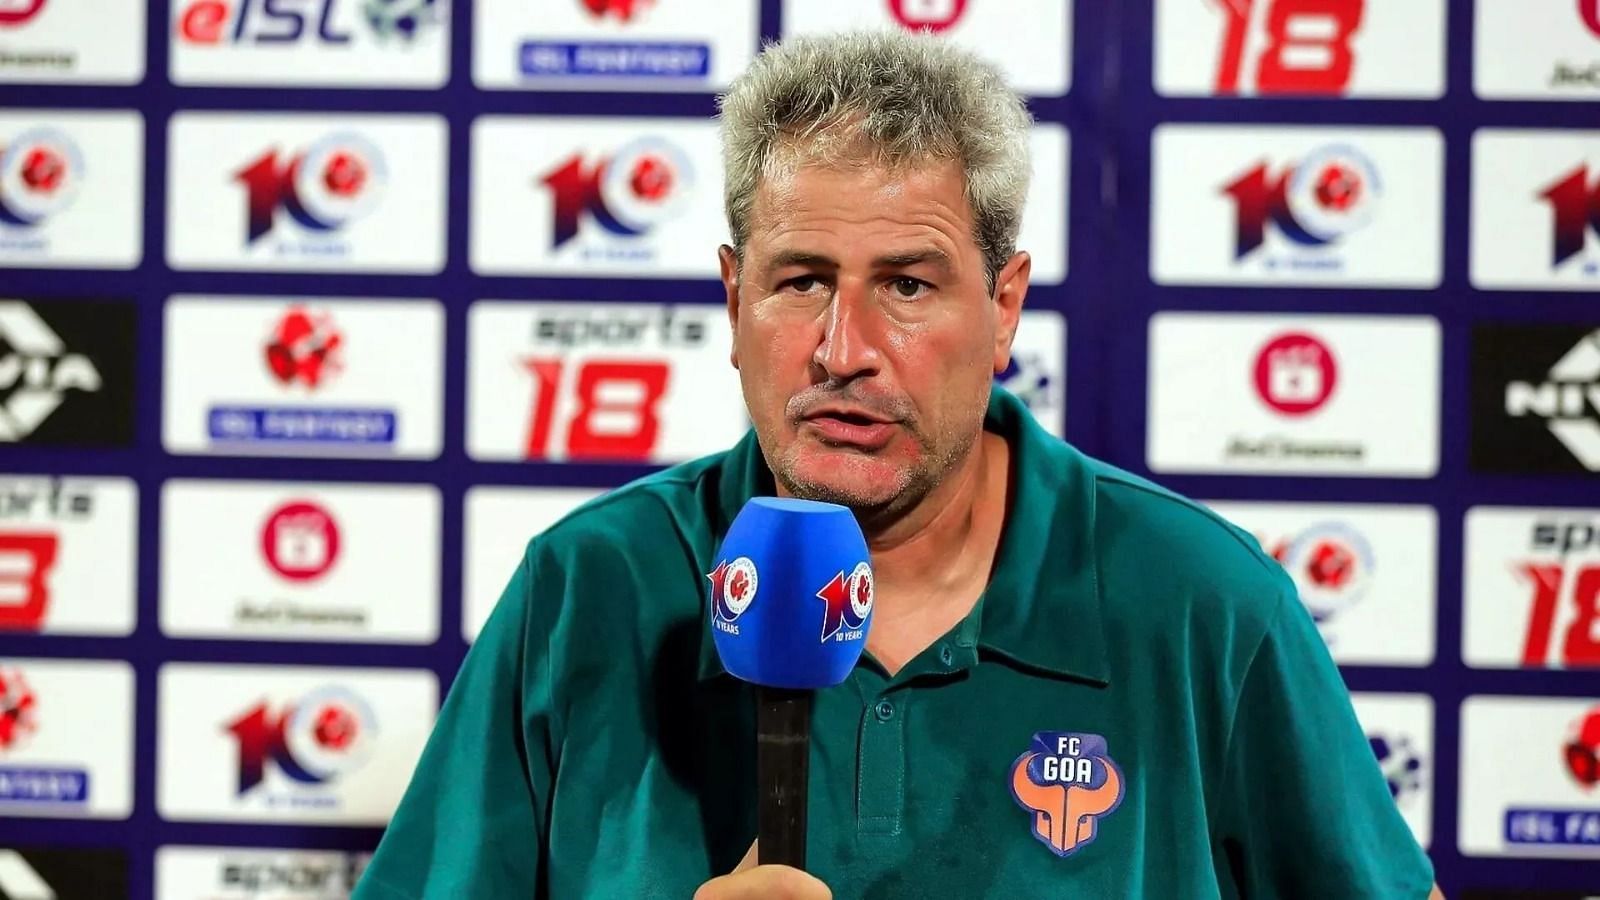 FC Goa head coach Manolo Marquez has heaped praise on the 25-year-old winger Mohammad Yasir who produced a Player of the Match winning performance in the 1-1 away draw against Mumbai City FC on Wednesday